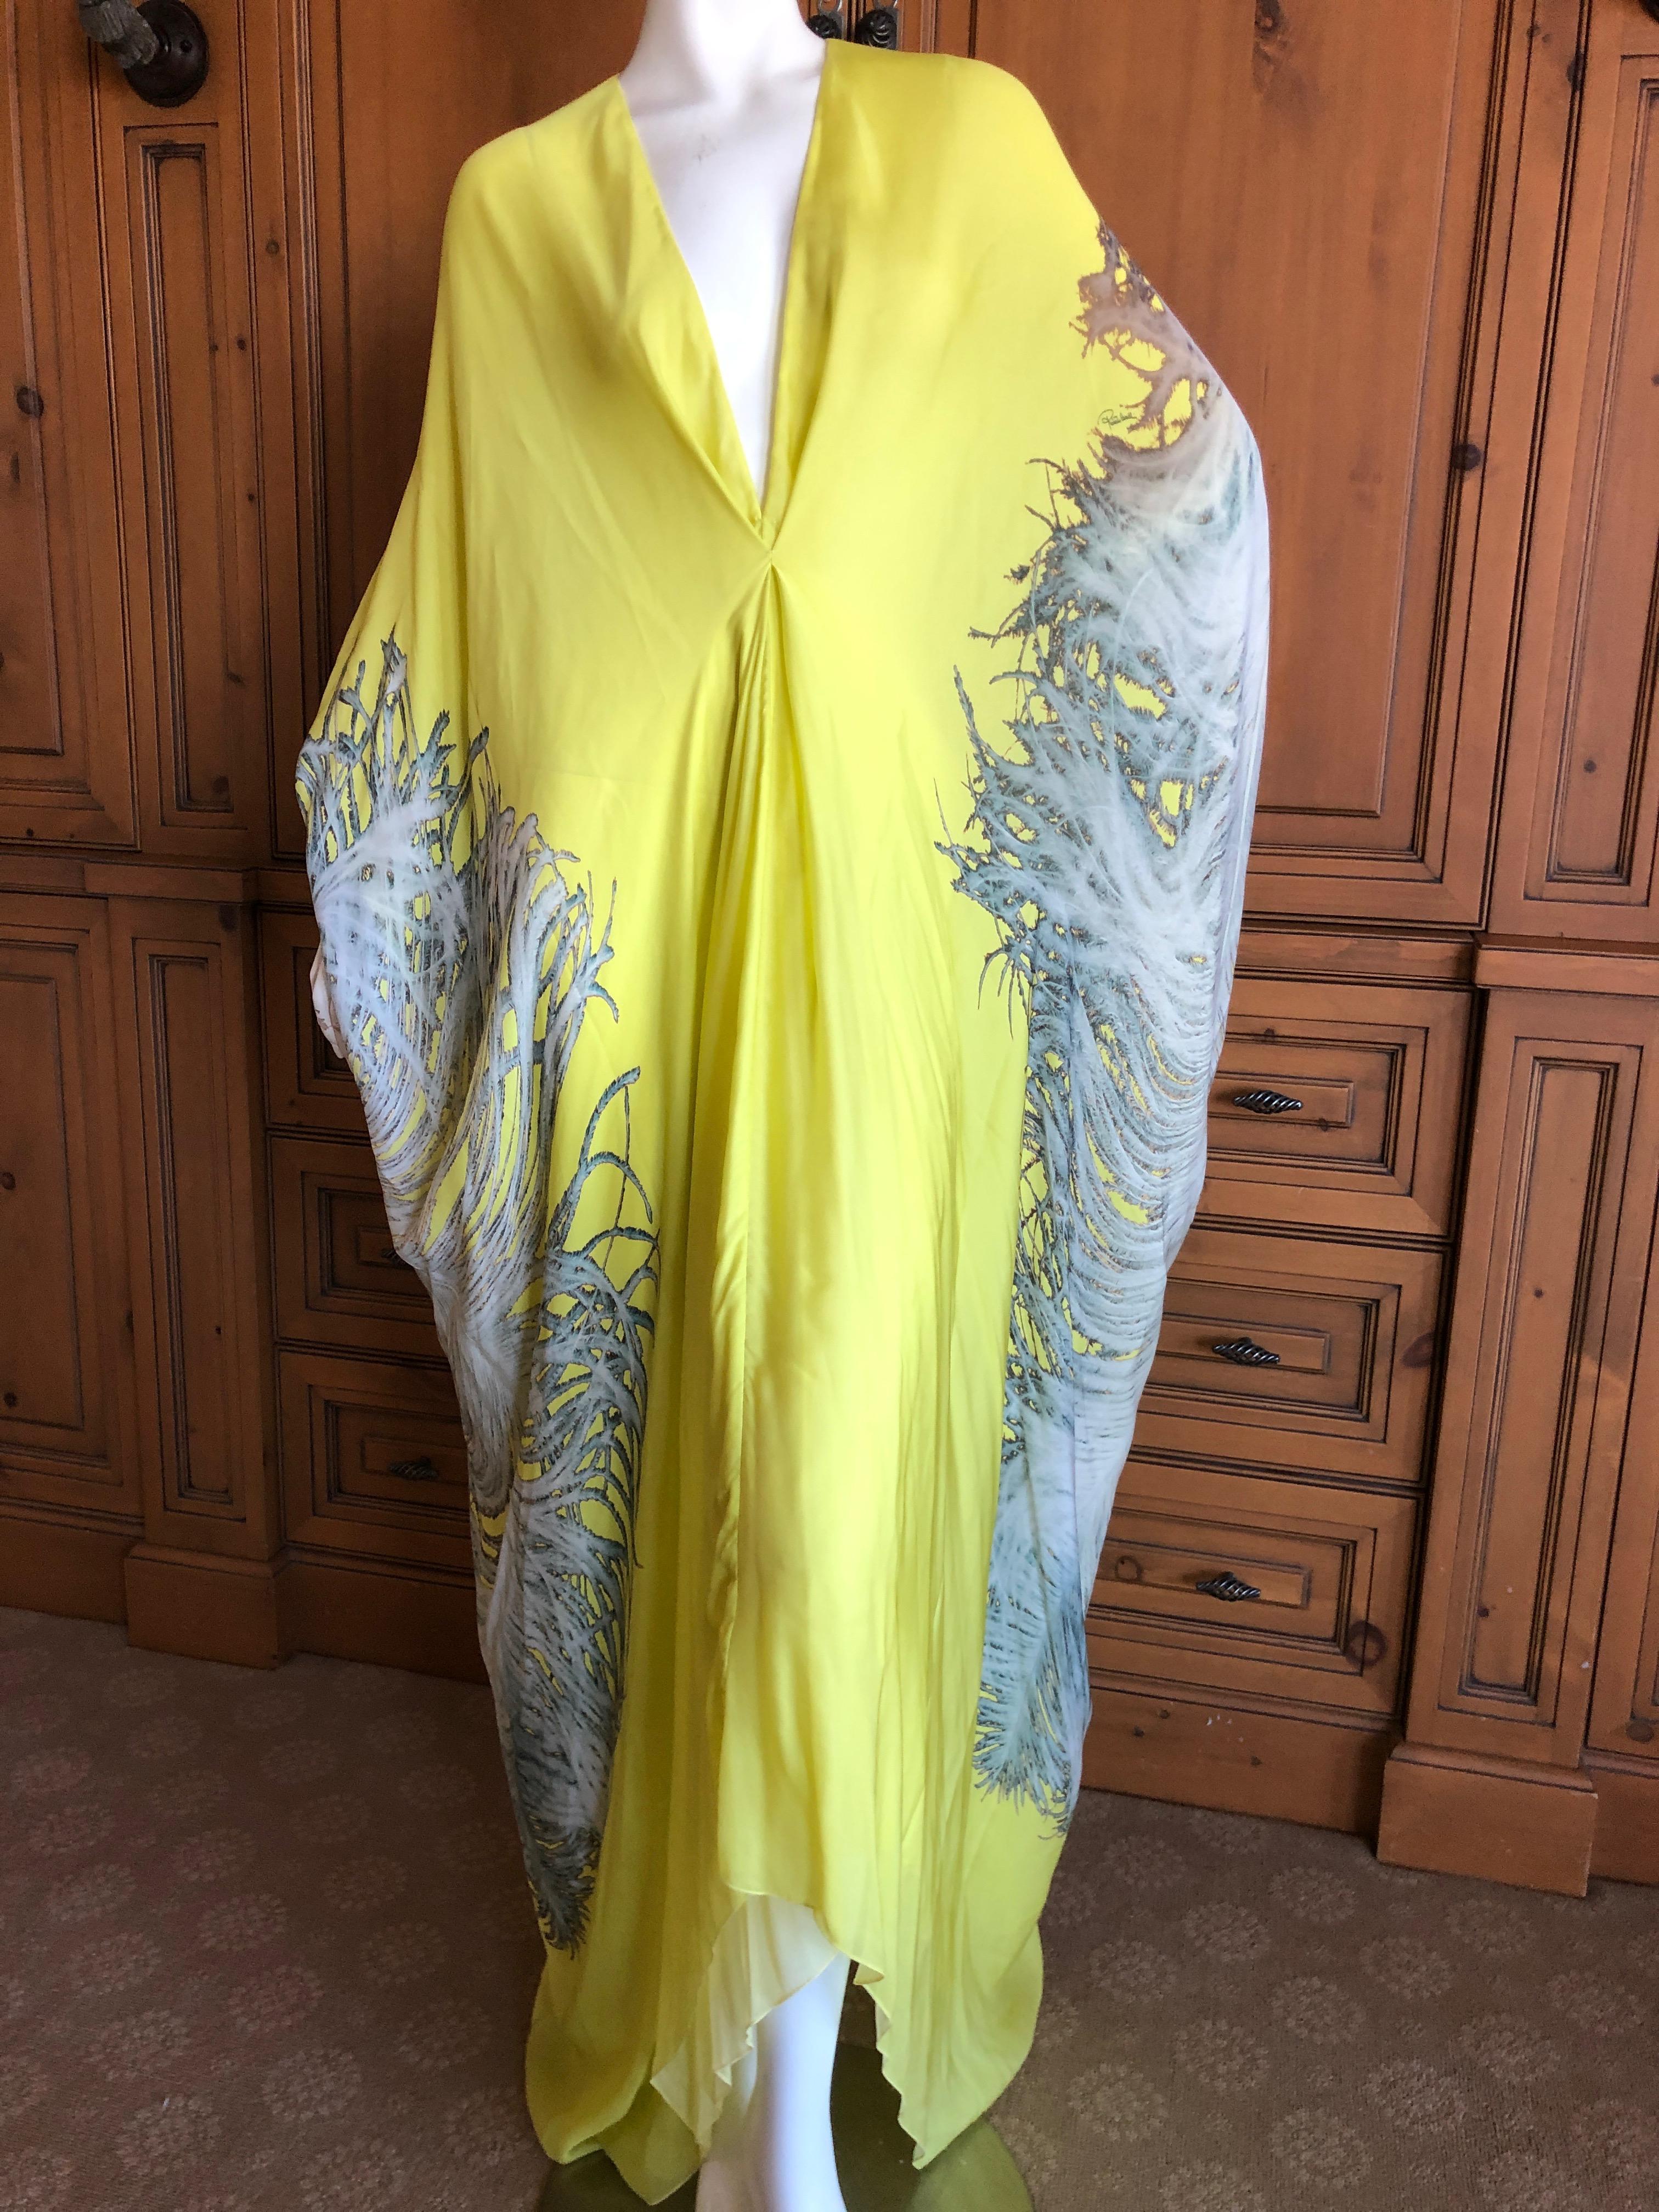 Roberto Cavalli Feather Print Yellow Silk Caftan Dress 
This is long in the back, shorter in front.
One size fits most, very voluminous.
Size 44
 Bust 40